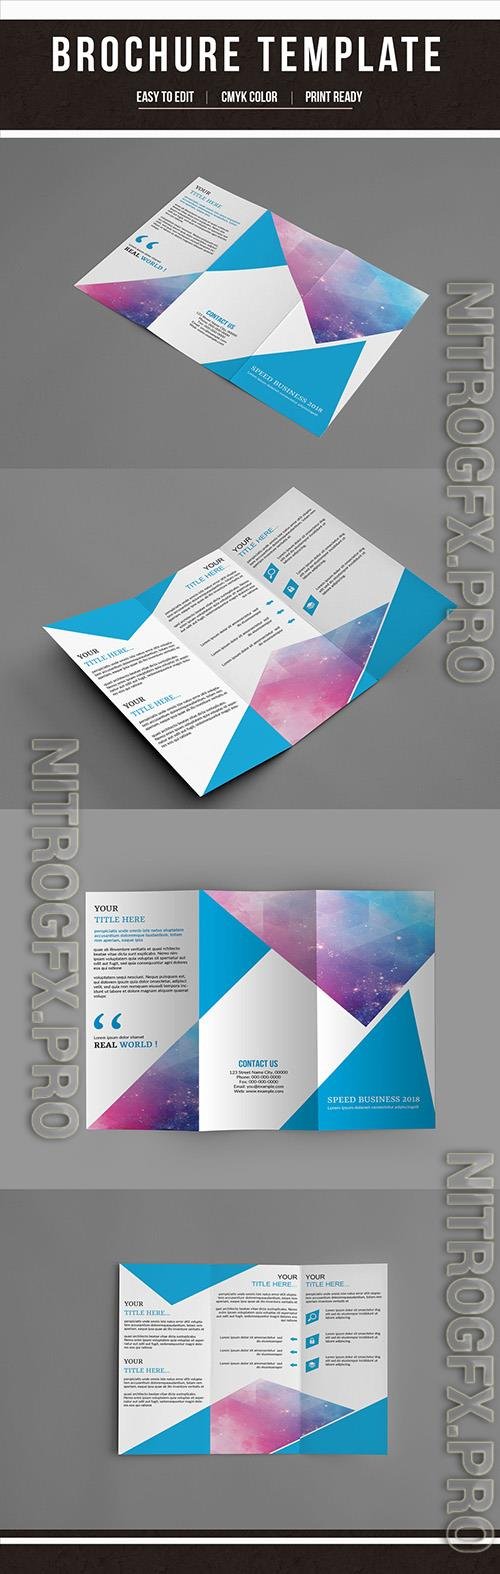 Business Brochure Layout with Triangular Design Elements 199626756